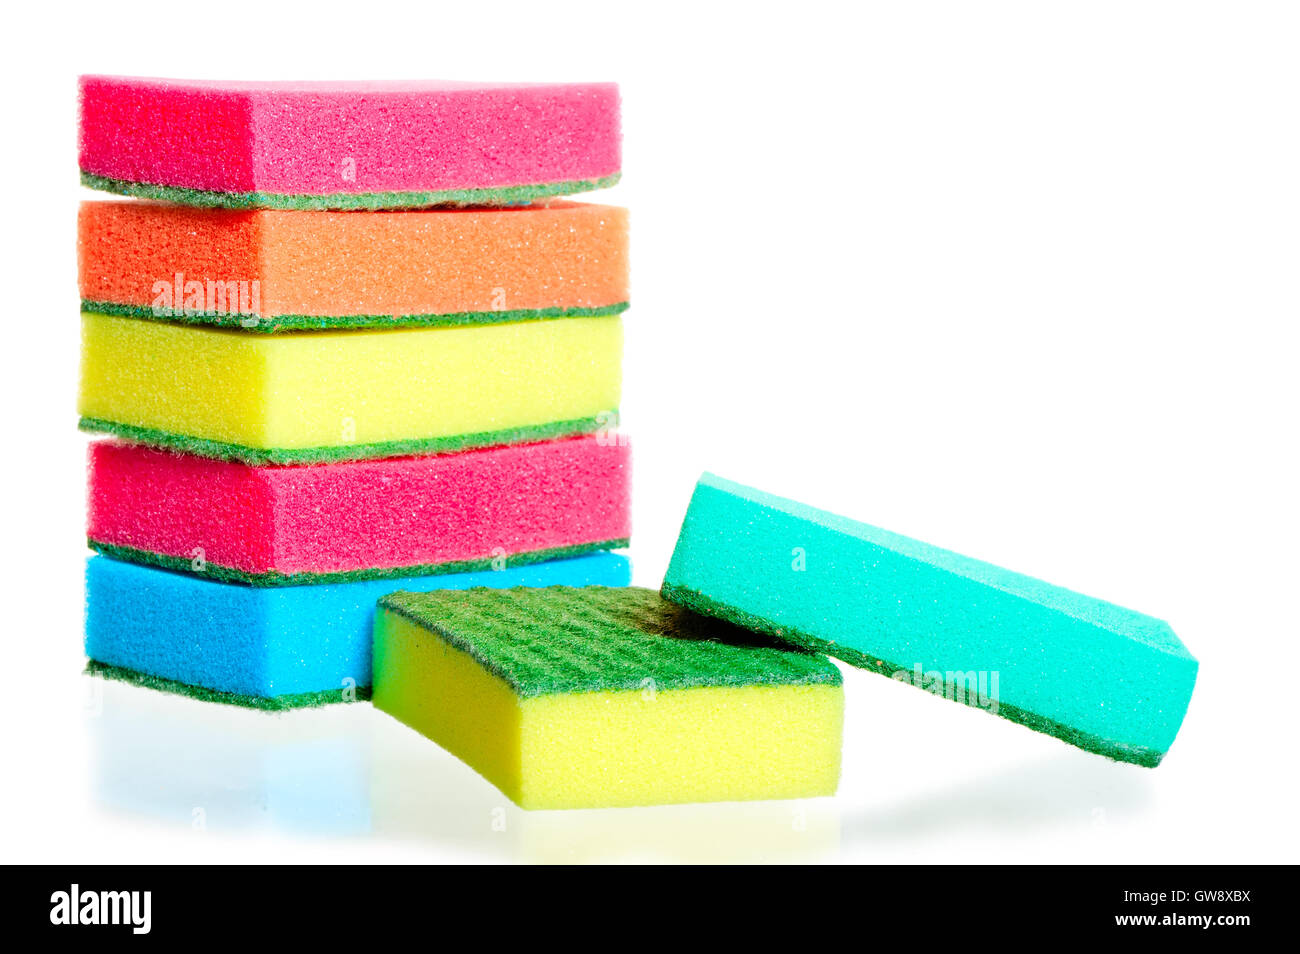 stack of sponges for washing dishes, and two nearby Stock Photo